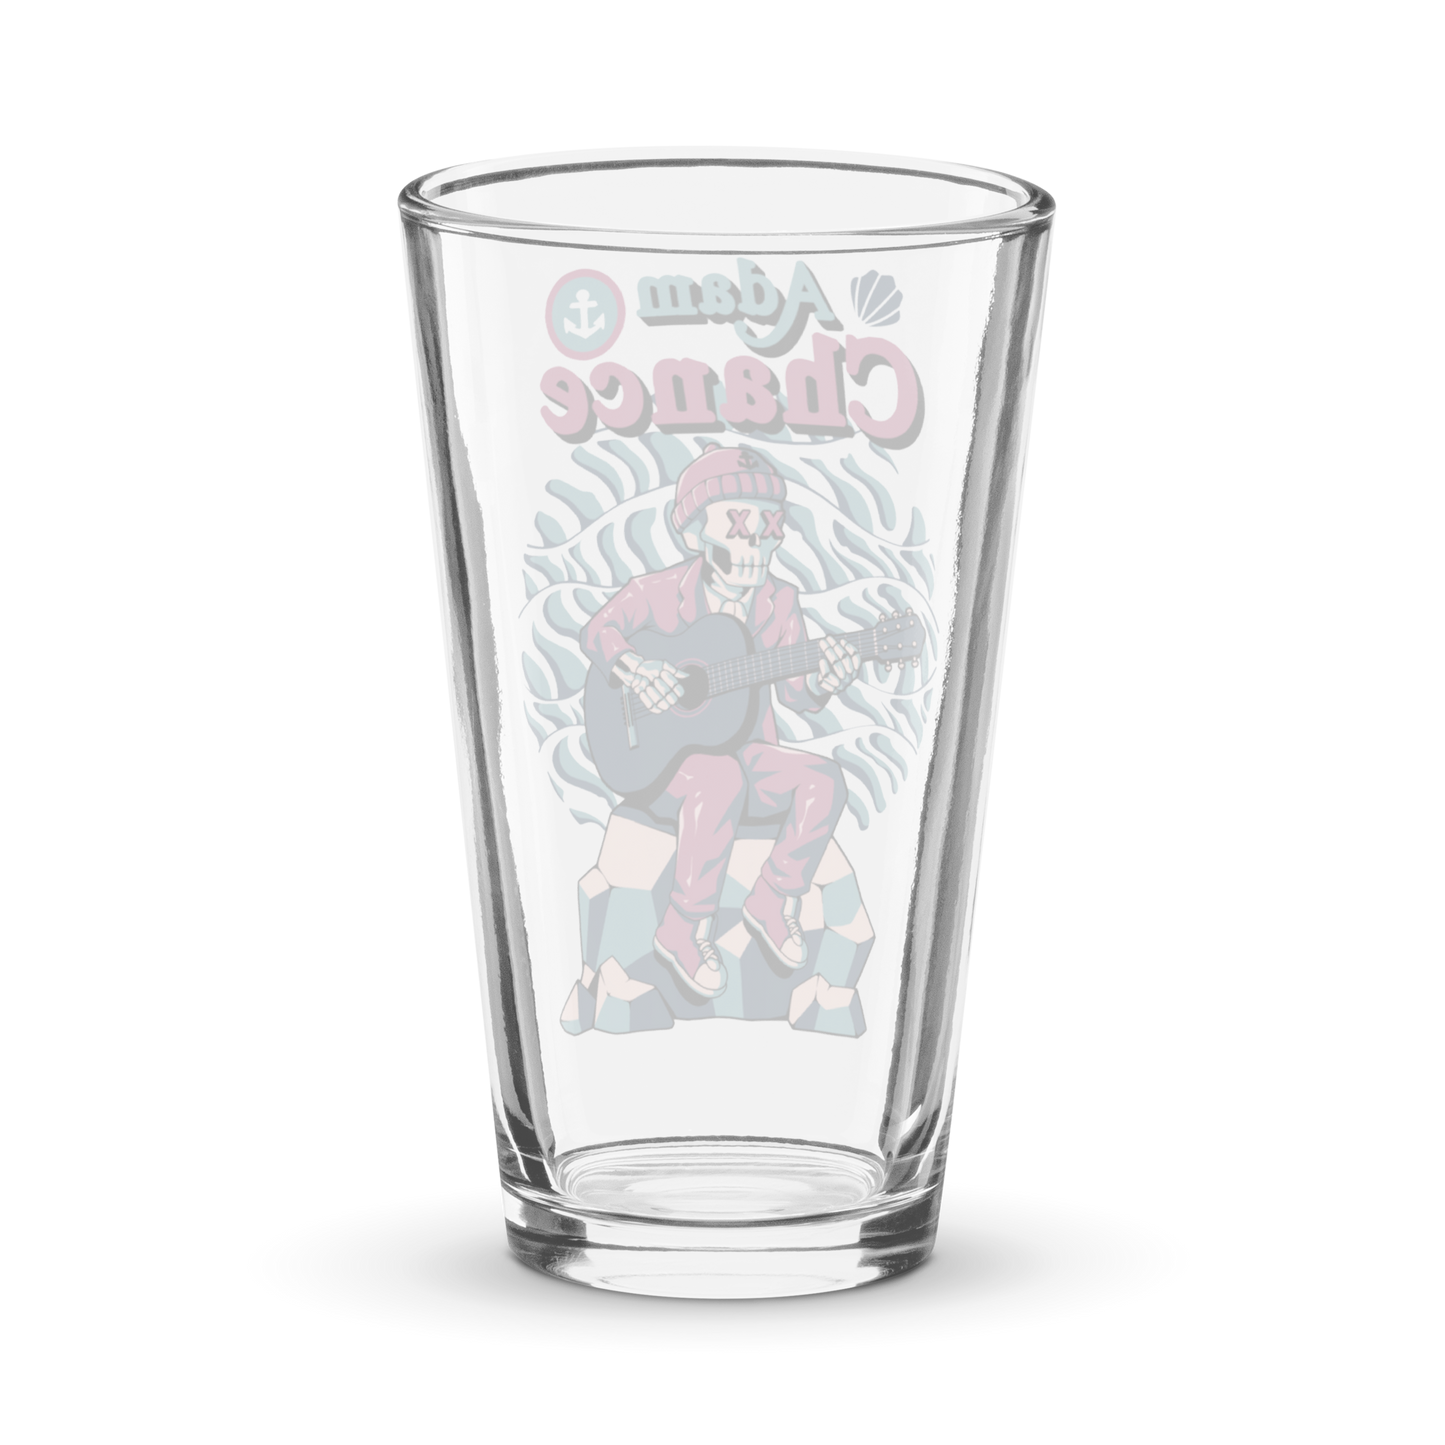 LIMITED EDITION Sealore Pint Glass